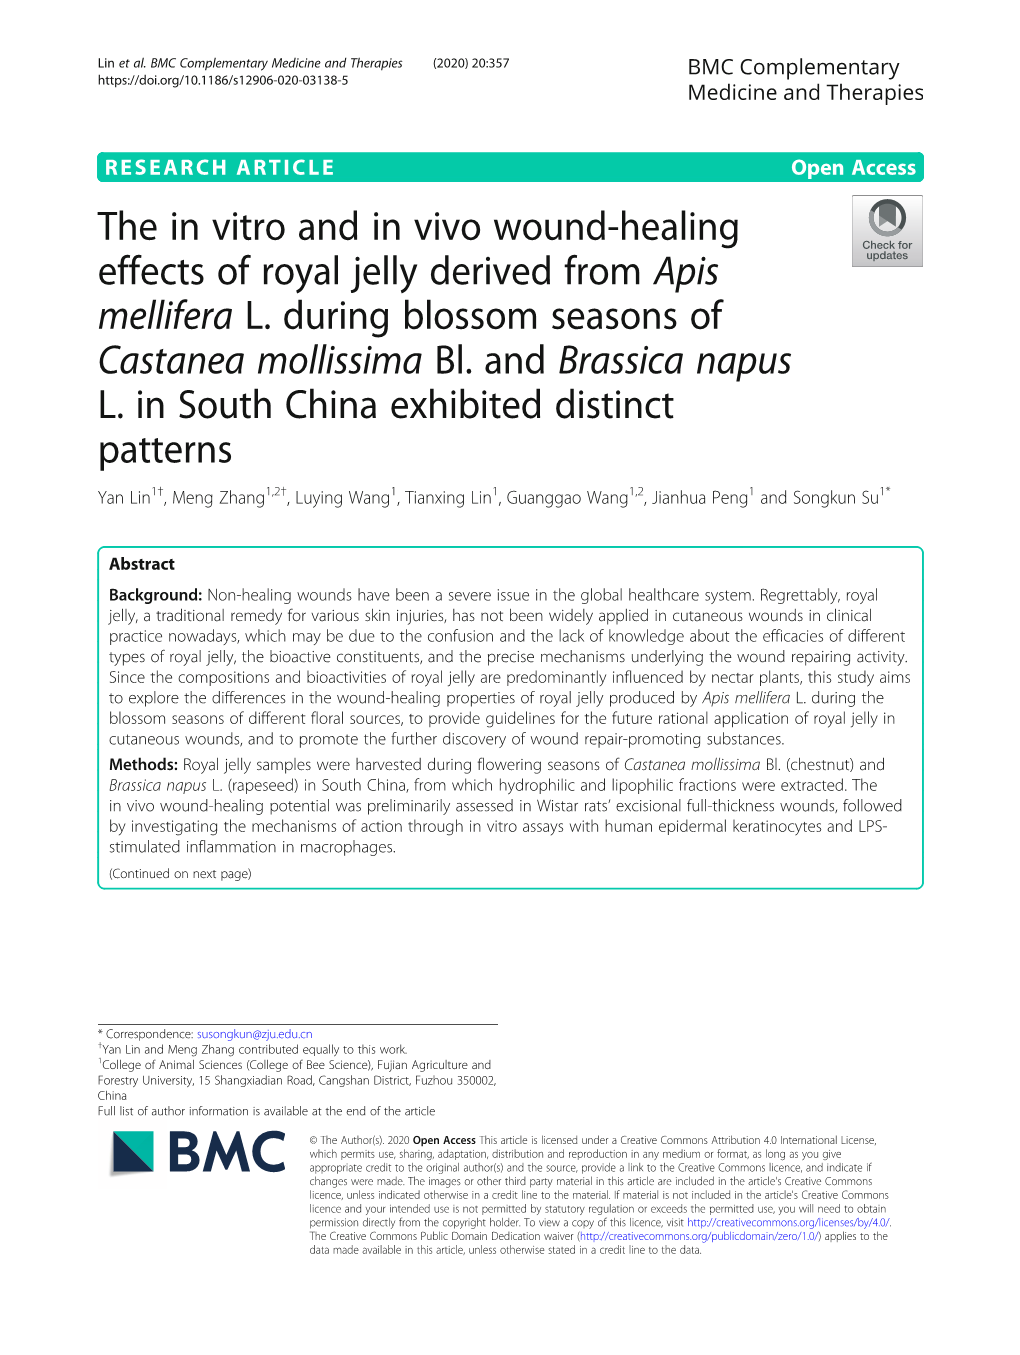 The in Vitro and in Vivo Wound-Healing Effects of Royal Jelly Derived from Apis Mellifera L